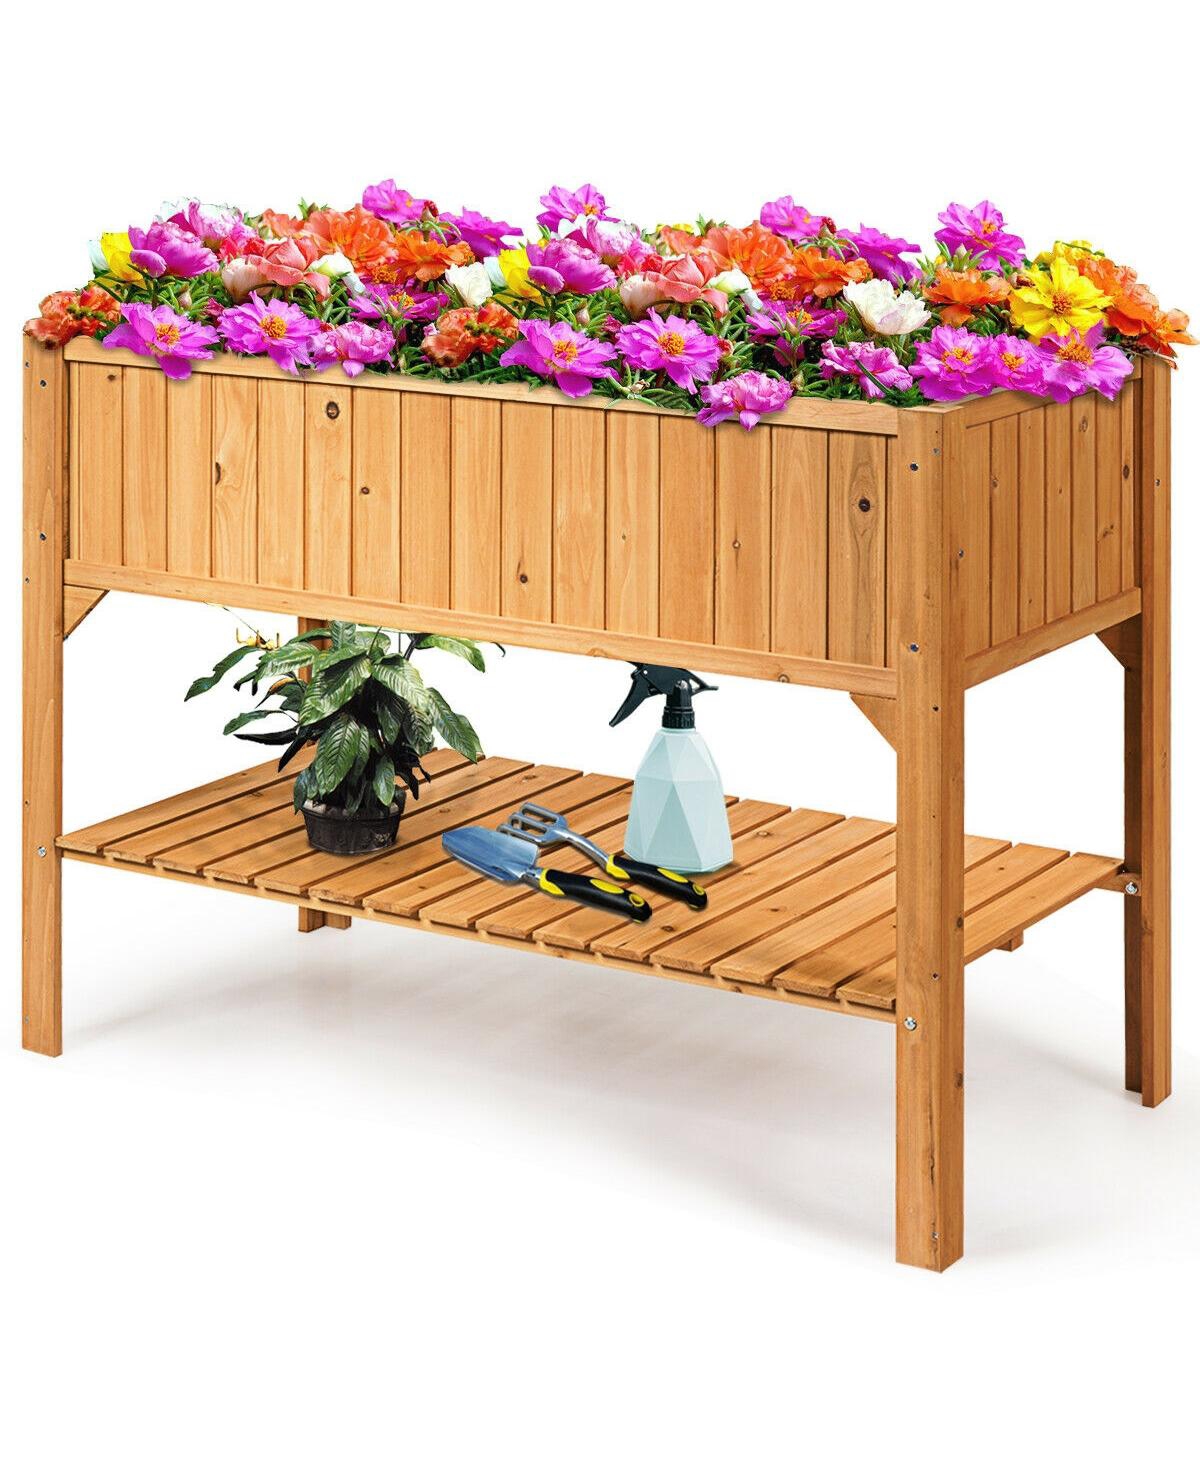 Wooden Elevated Planter Box Shelf Suitable for Garden Use - Brown